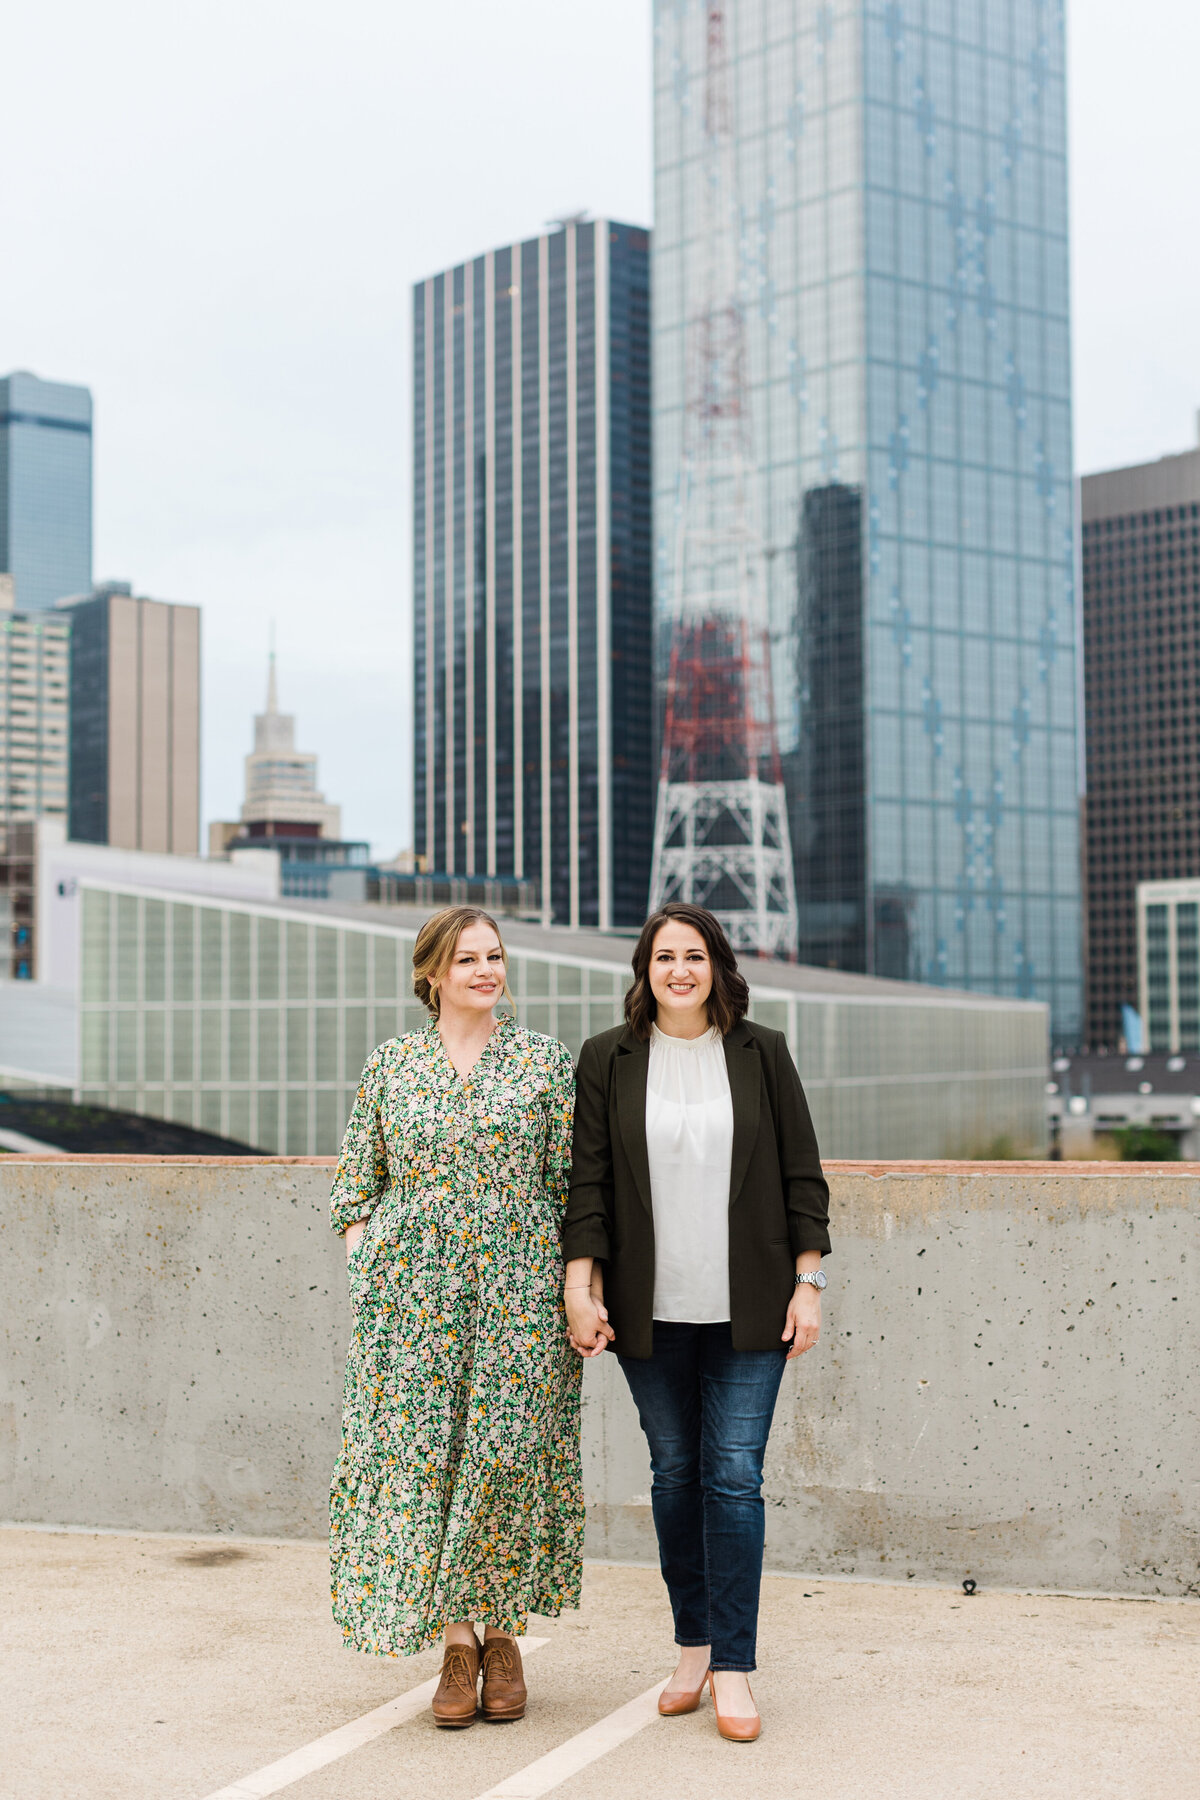 Two women holding hands and posing on top of a parking garage during their downtown engagement photoshoot in Dallas, Texas.The woman on the left is wearing a long, colorful floral dress and brown shoes. The woman on the right is wearing a white shirt, black blazer, jeans, and heels. A portion of the Dallas skyline can be seen towering behind them.